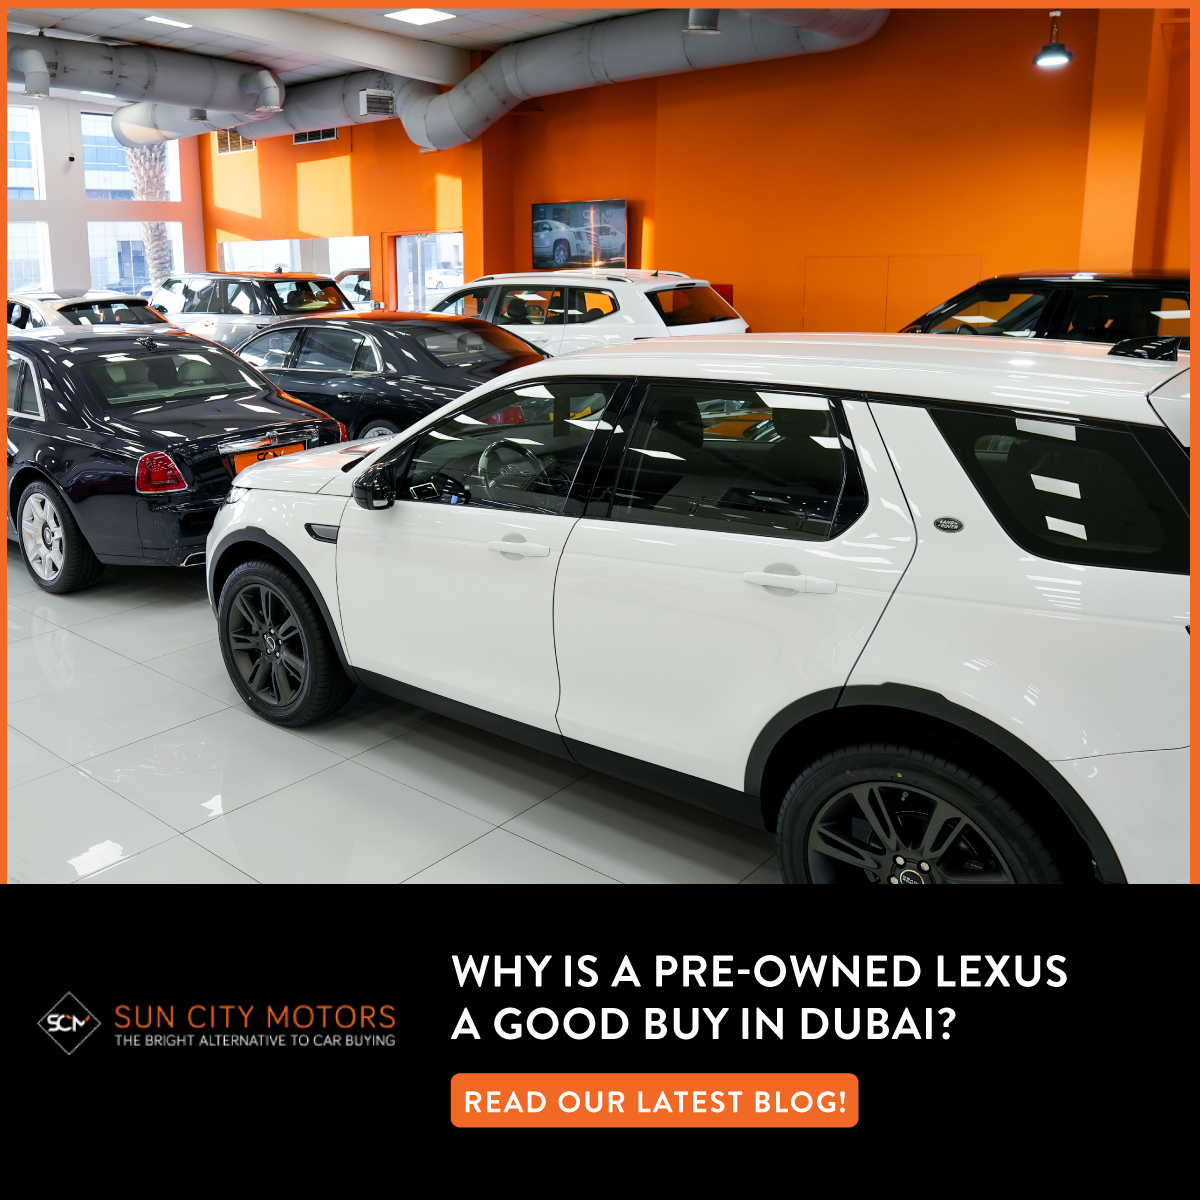 Why is a pre-owned Lexus a good buy in Dubai?